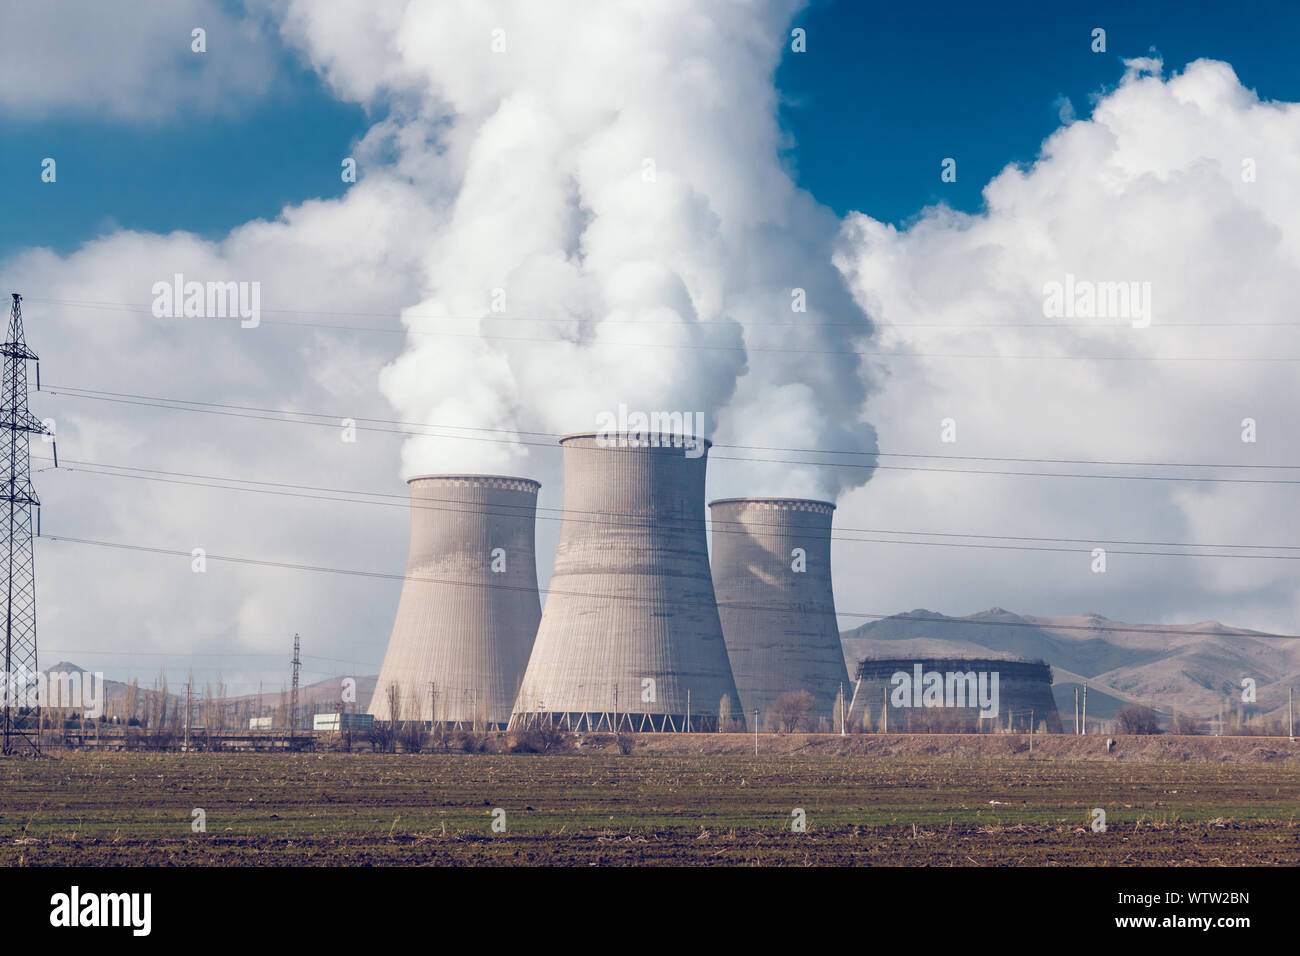 Factory pipes with thick white smoke from heat energy nuclear plant polluting environment Stock Photo